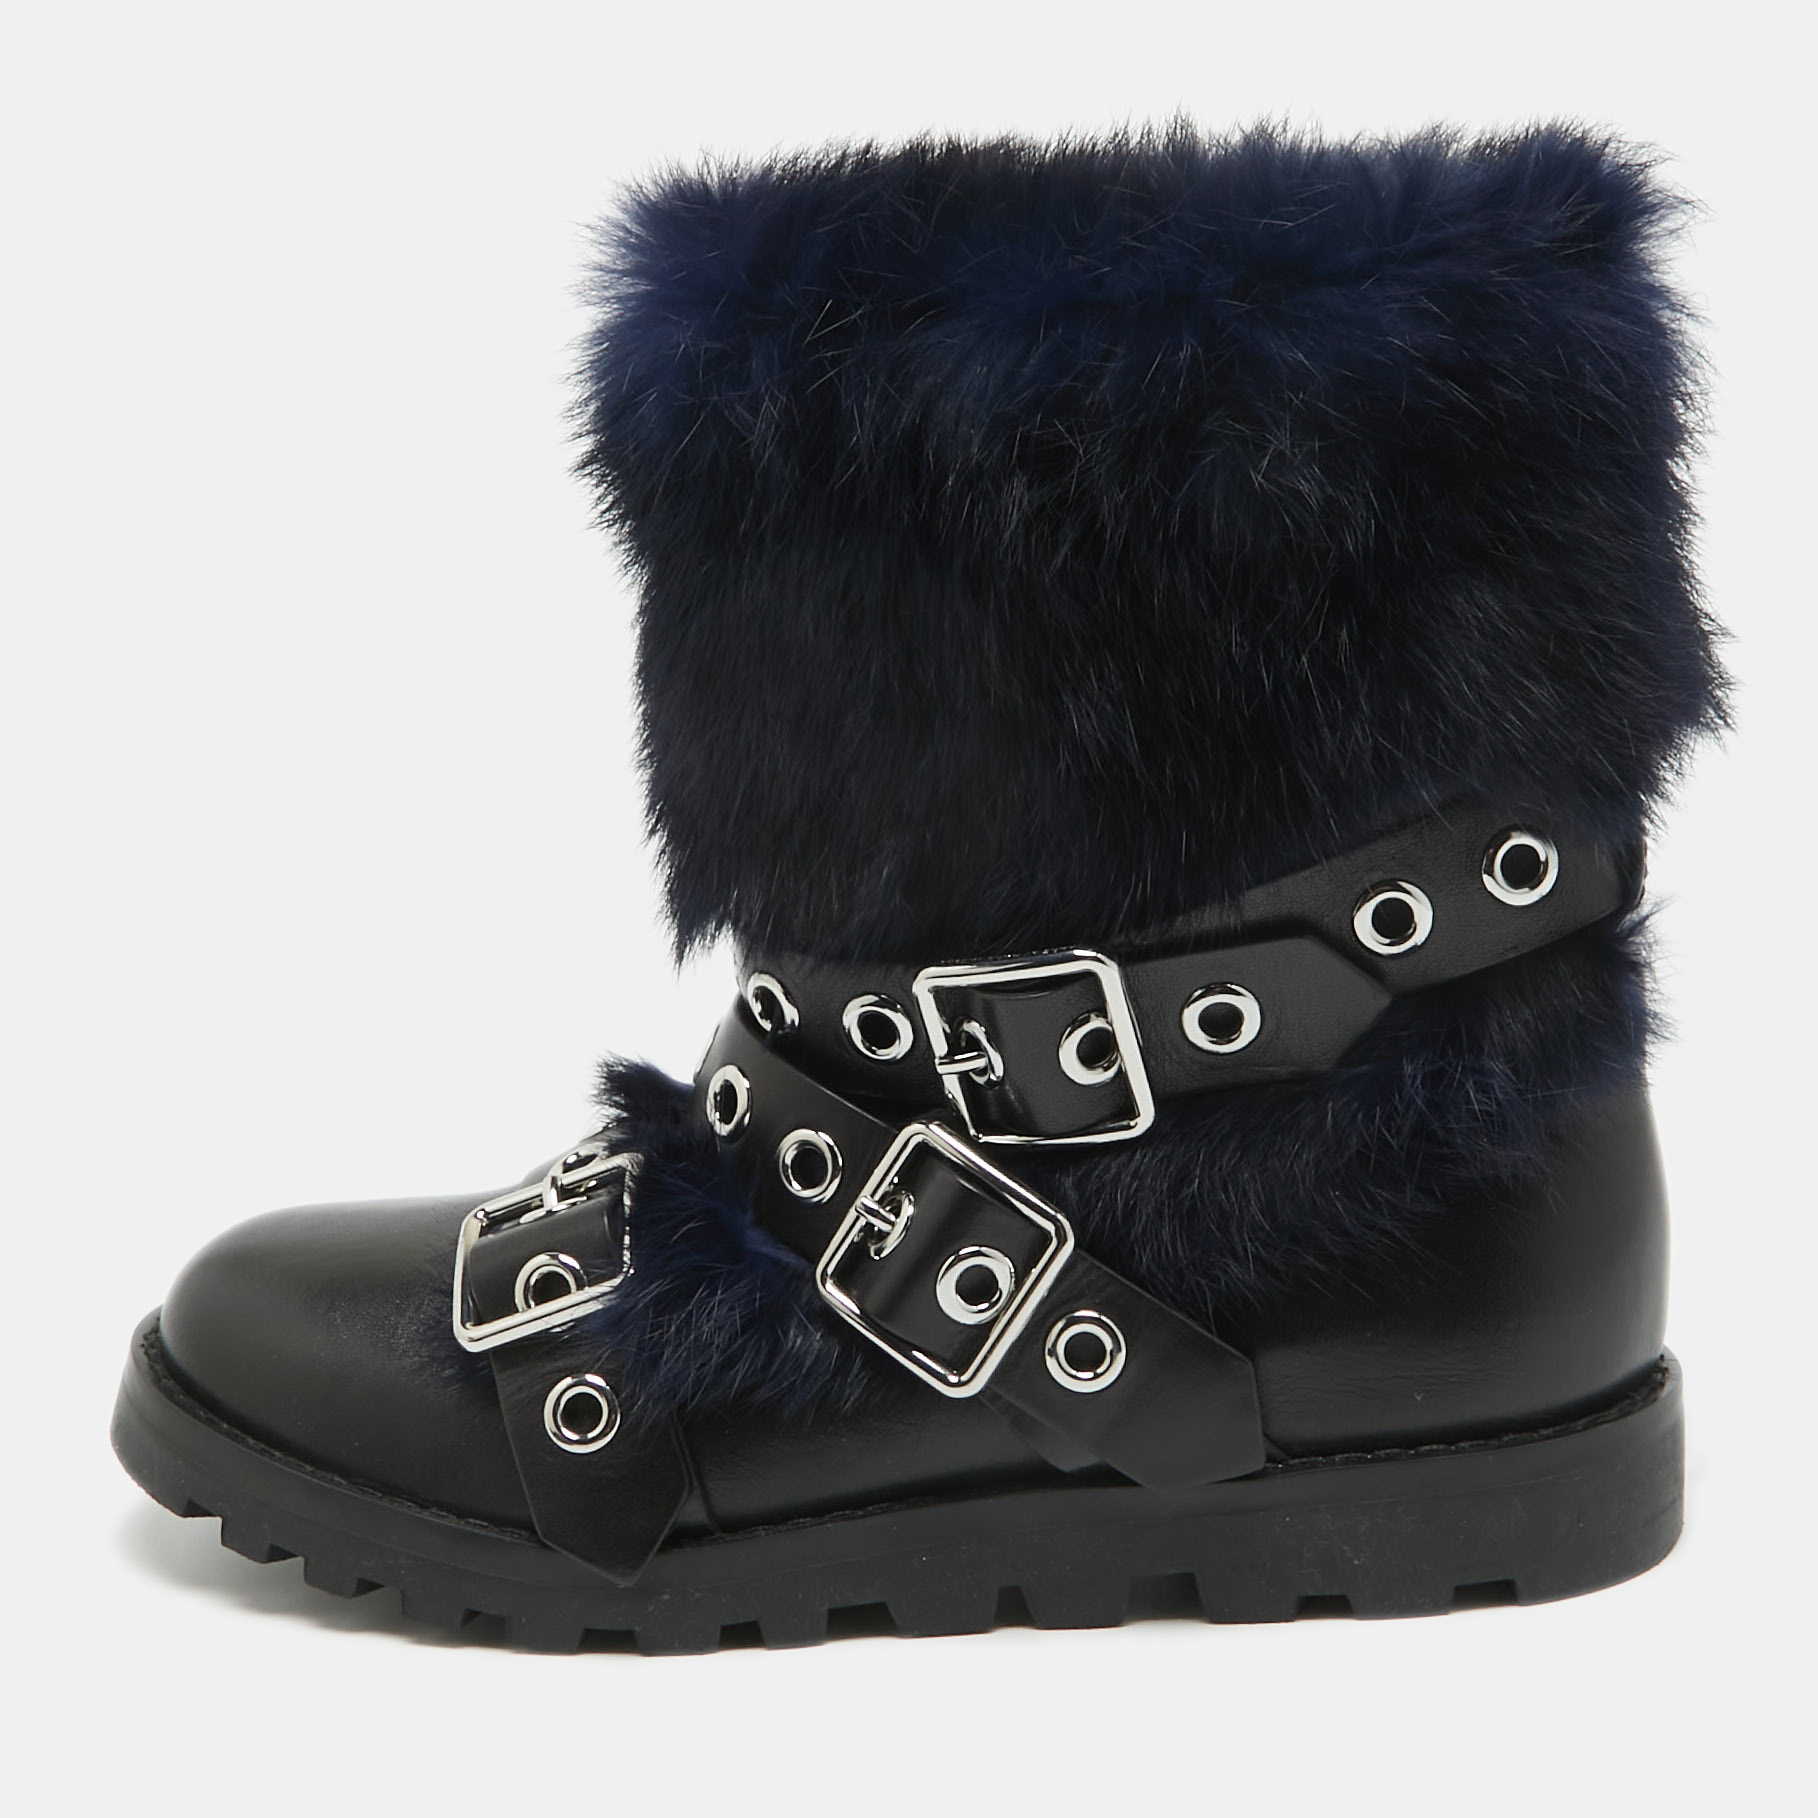 Marc by marc jacobs black/blue ricky rex rabbit fur and leather buckled moto boots size 36.5